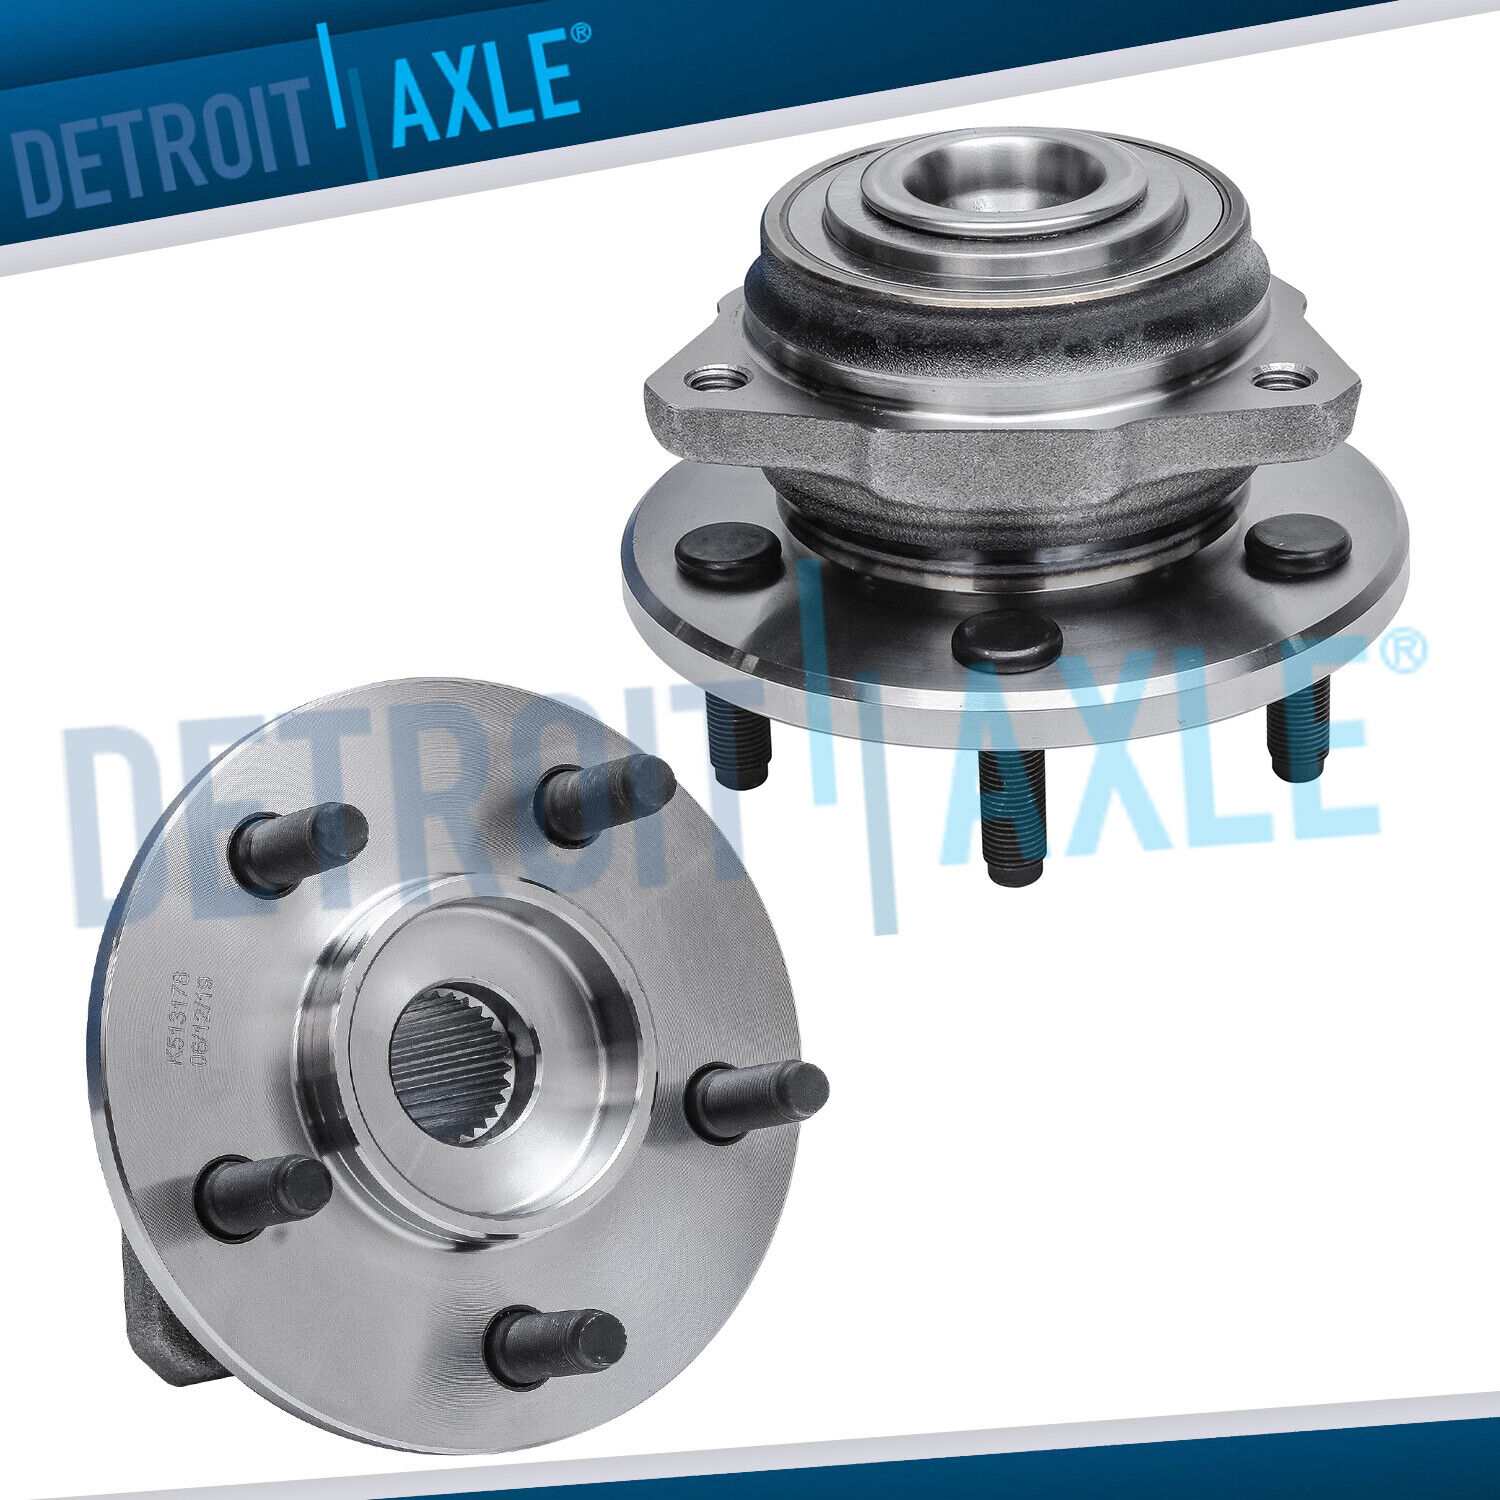 Pair (2) Front Wheel Bearing & Hub for 2002 2003 2004 2005 Jeep Liberty w/o ABS